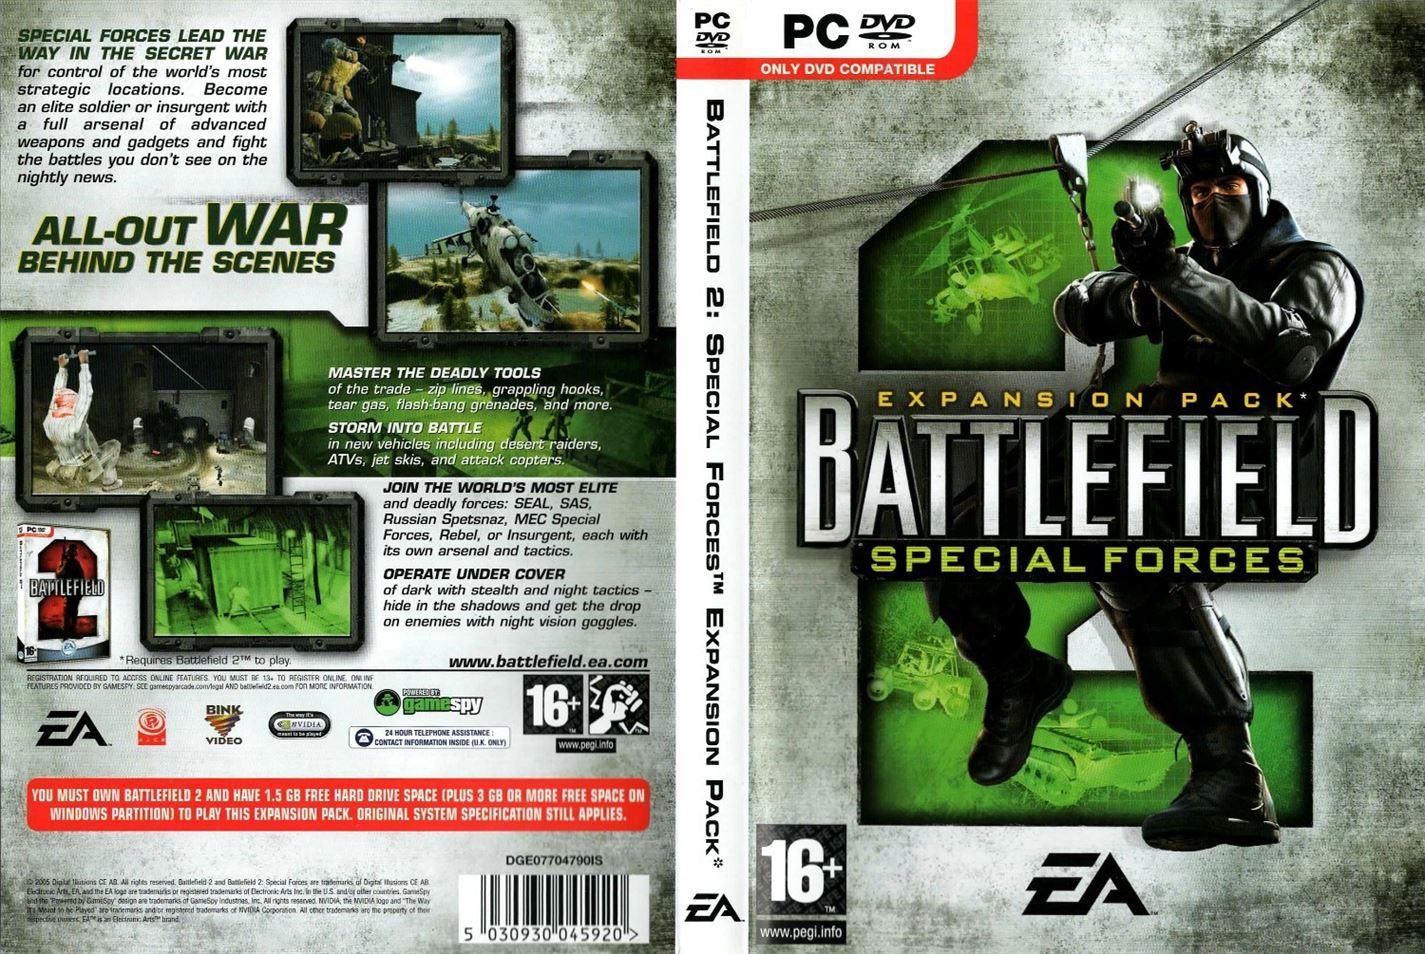 Battlefield 2 Special Forces Expansion Pack (PC) - UK Seller